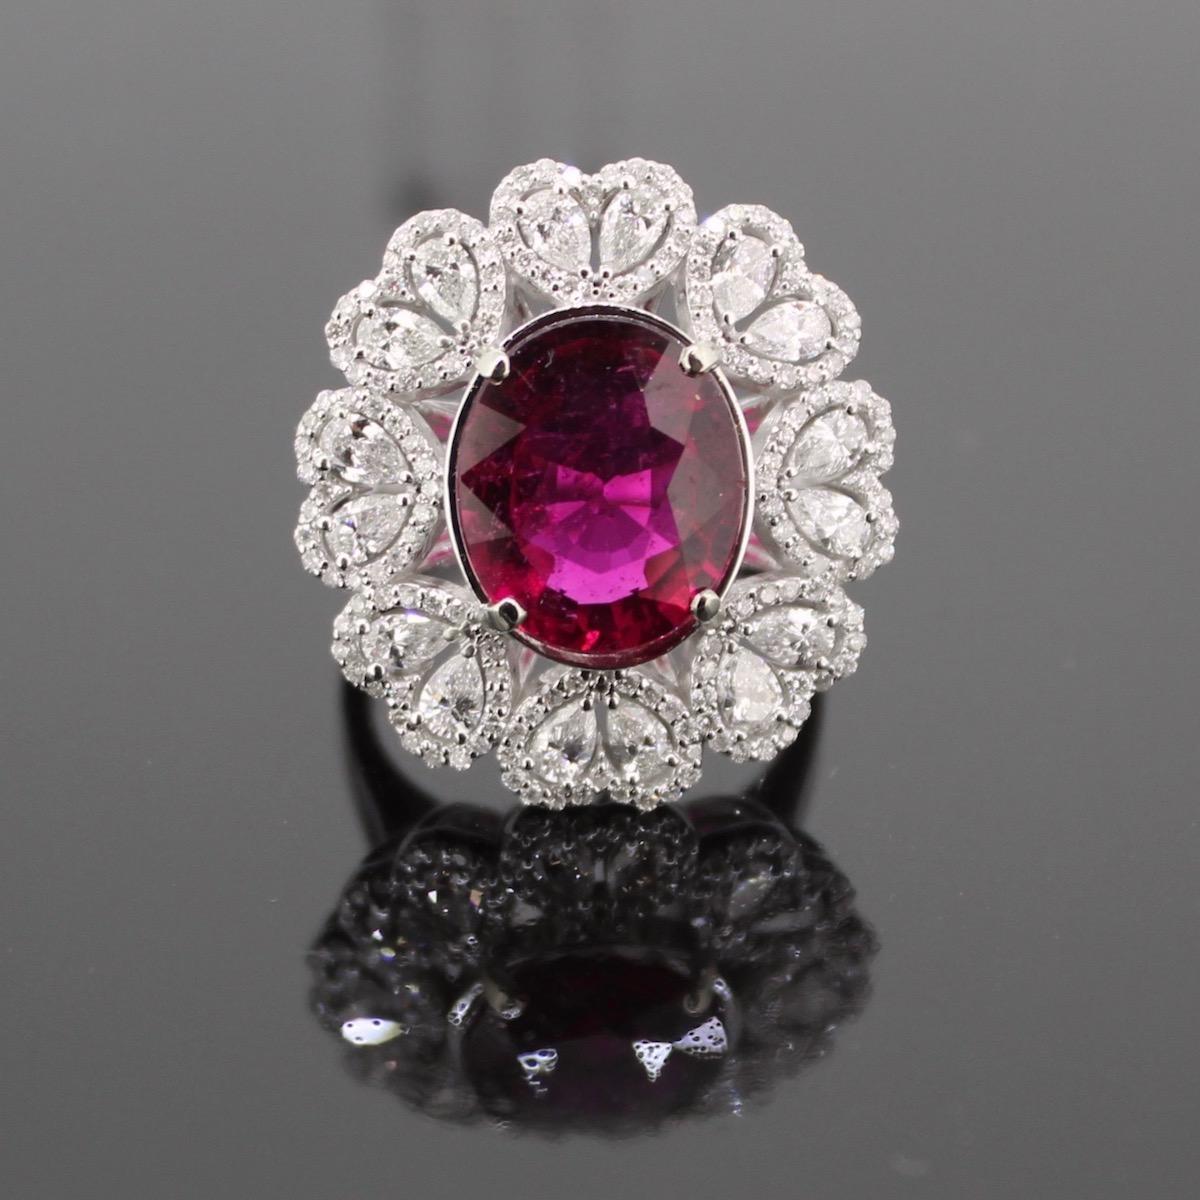 Weight:	10.75gr


Metal:		18kt white Gold


Stones:	1 Rubellite Tourmaline
•	Cut:	Oval
•	Carat weight:	5.17ct 


Other Stones:	16 Diamonds				152 Diamonds
•	Cut:	Pear						Round
•	Total carat weight: 	1.30ct approximately			0.80ct